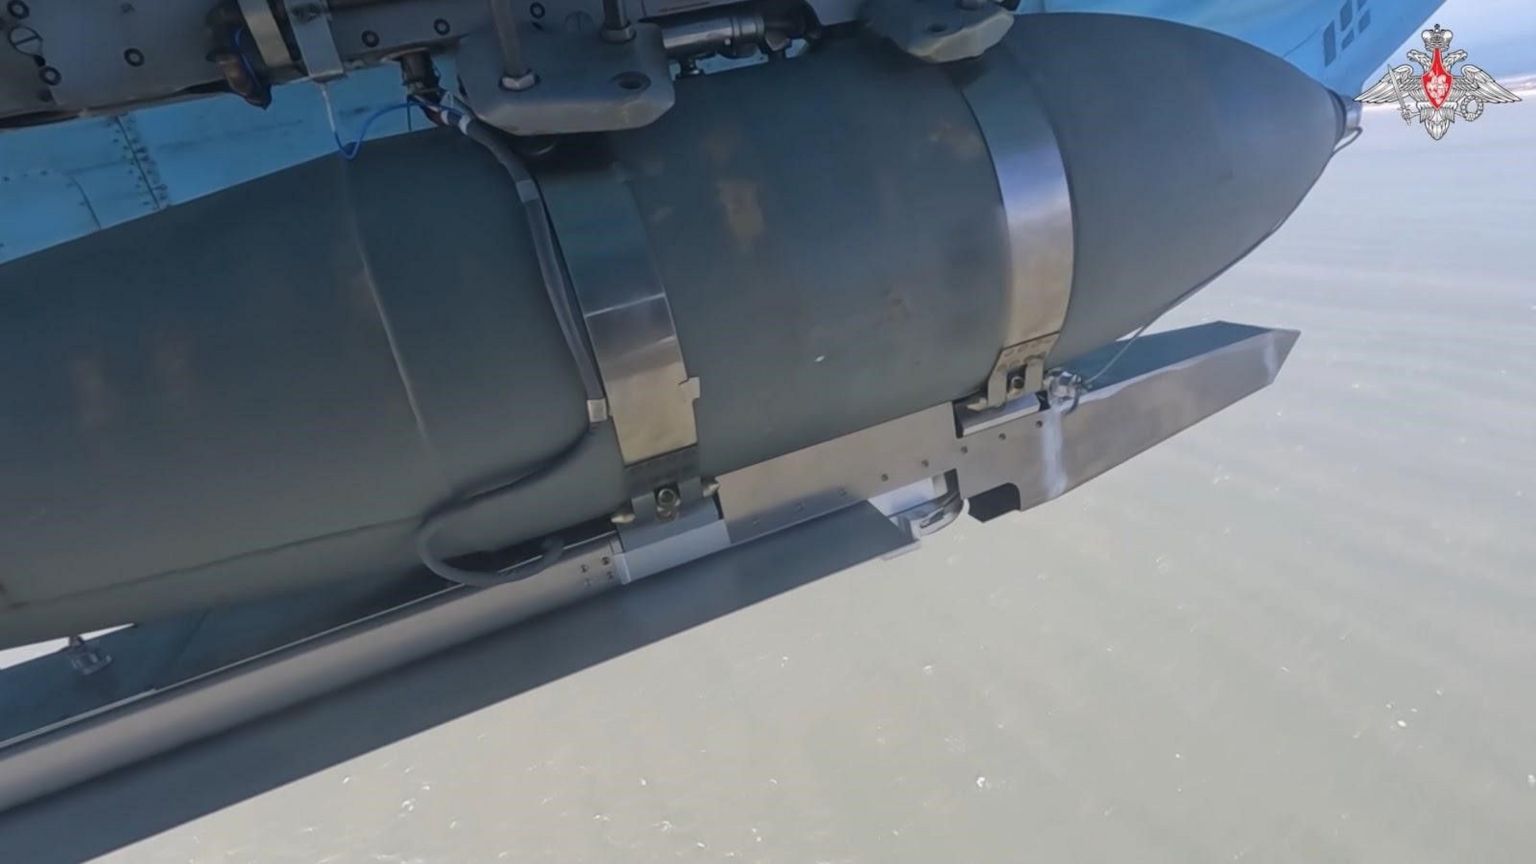  Glide bomb mounted on Su-34 fighter